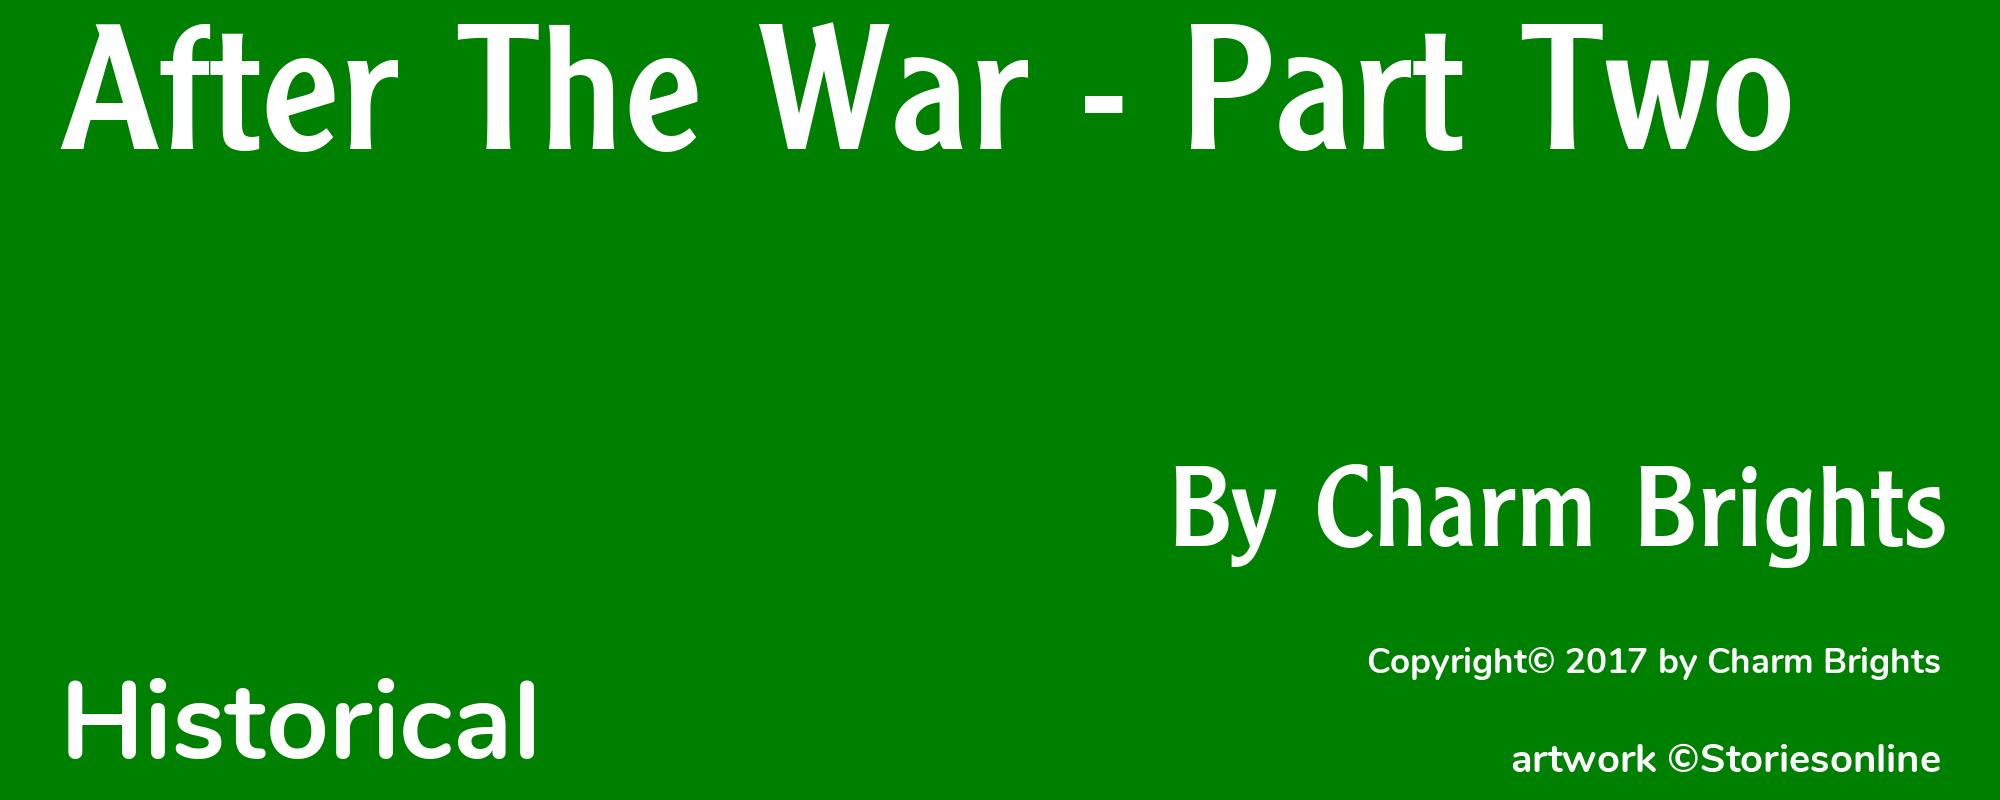 After The War - Part Two - Cover